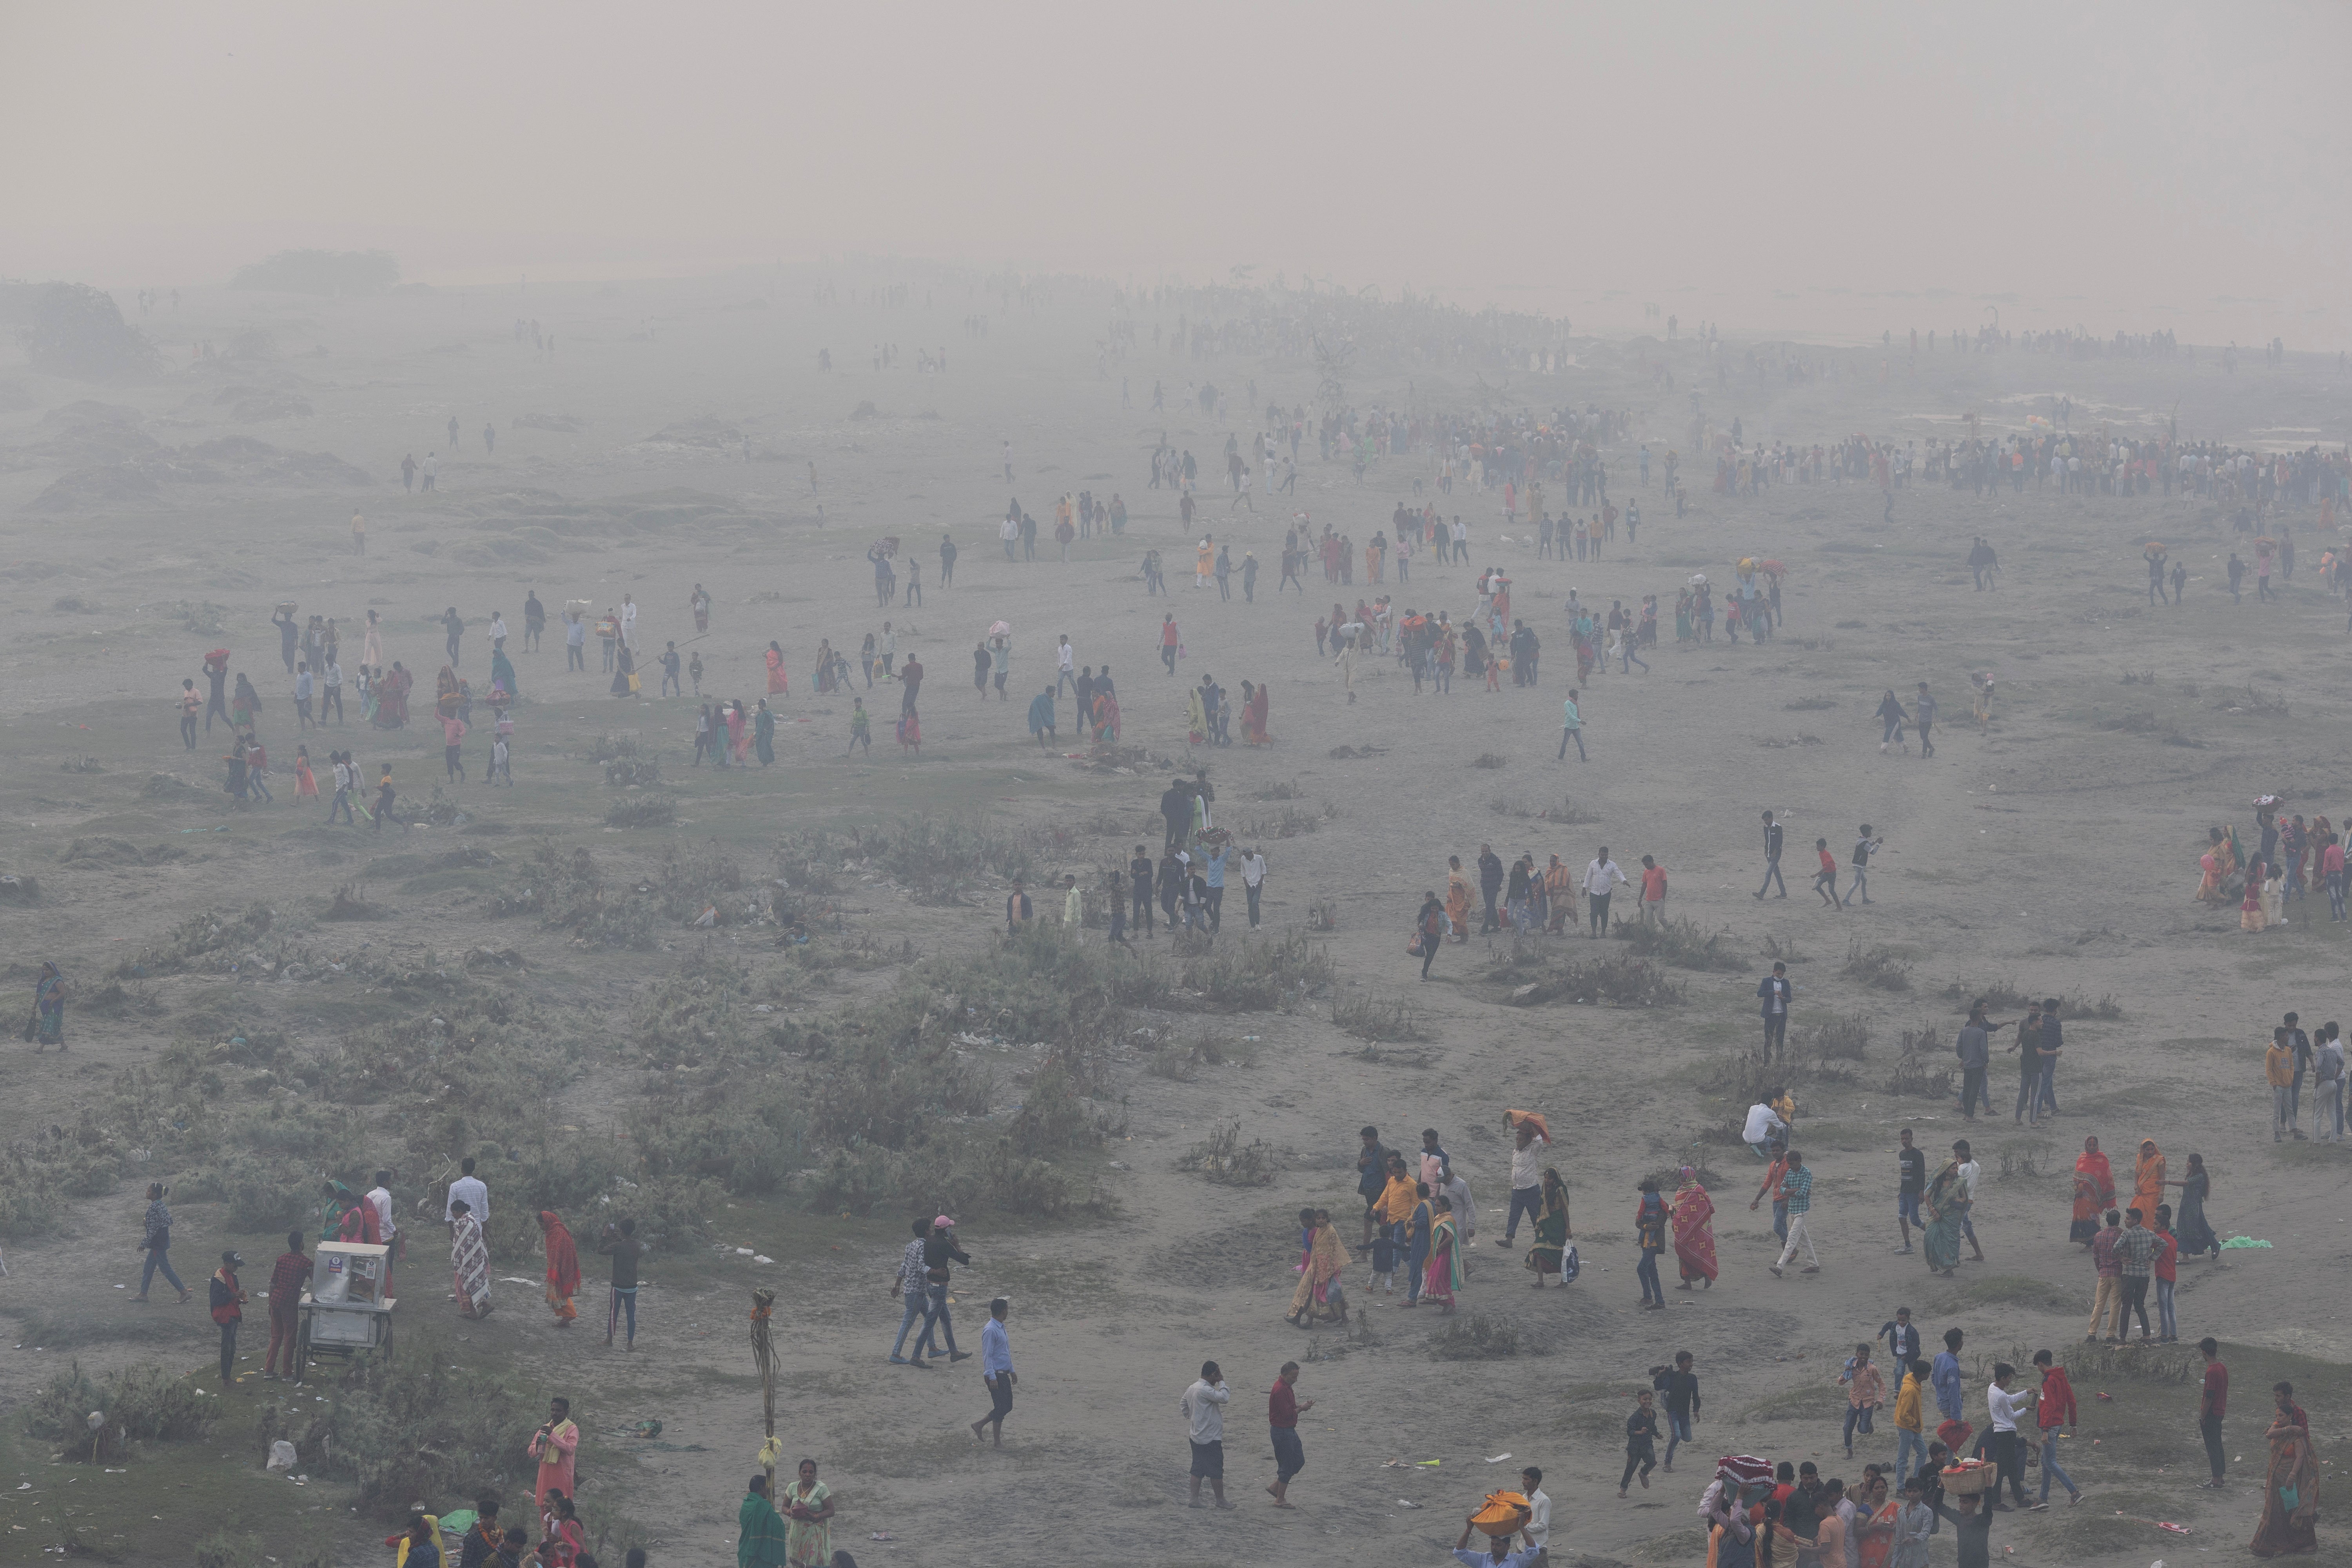 Hindu devotees gather to worship on the banks of the Yamuna river